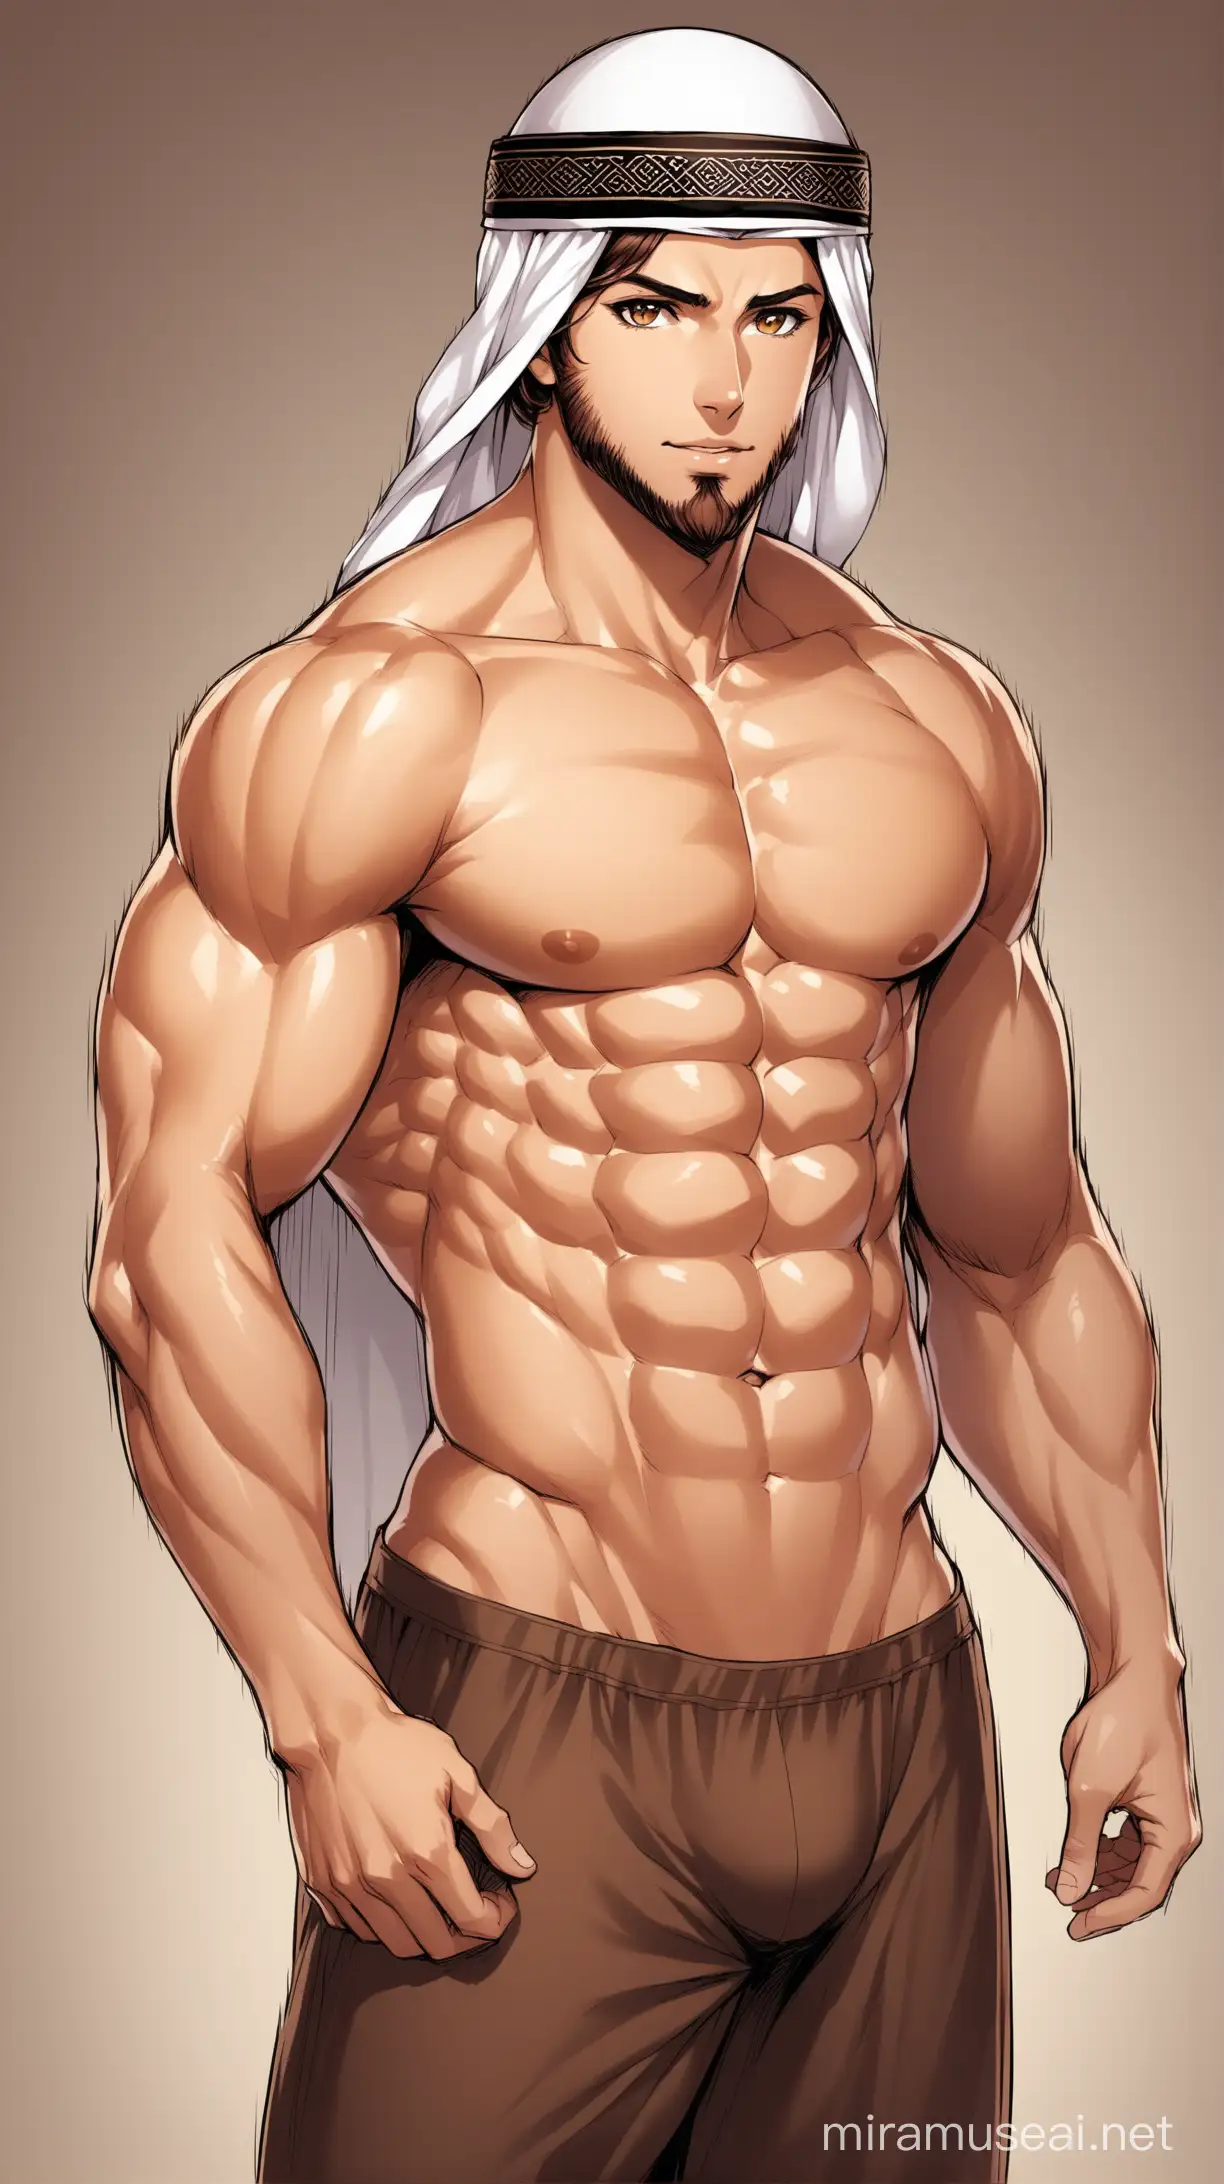 Muscular Man with Brown Eyes and Arabic Hat Showing Abs